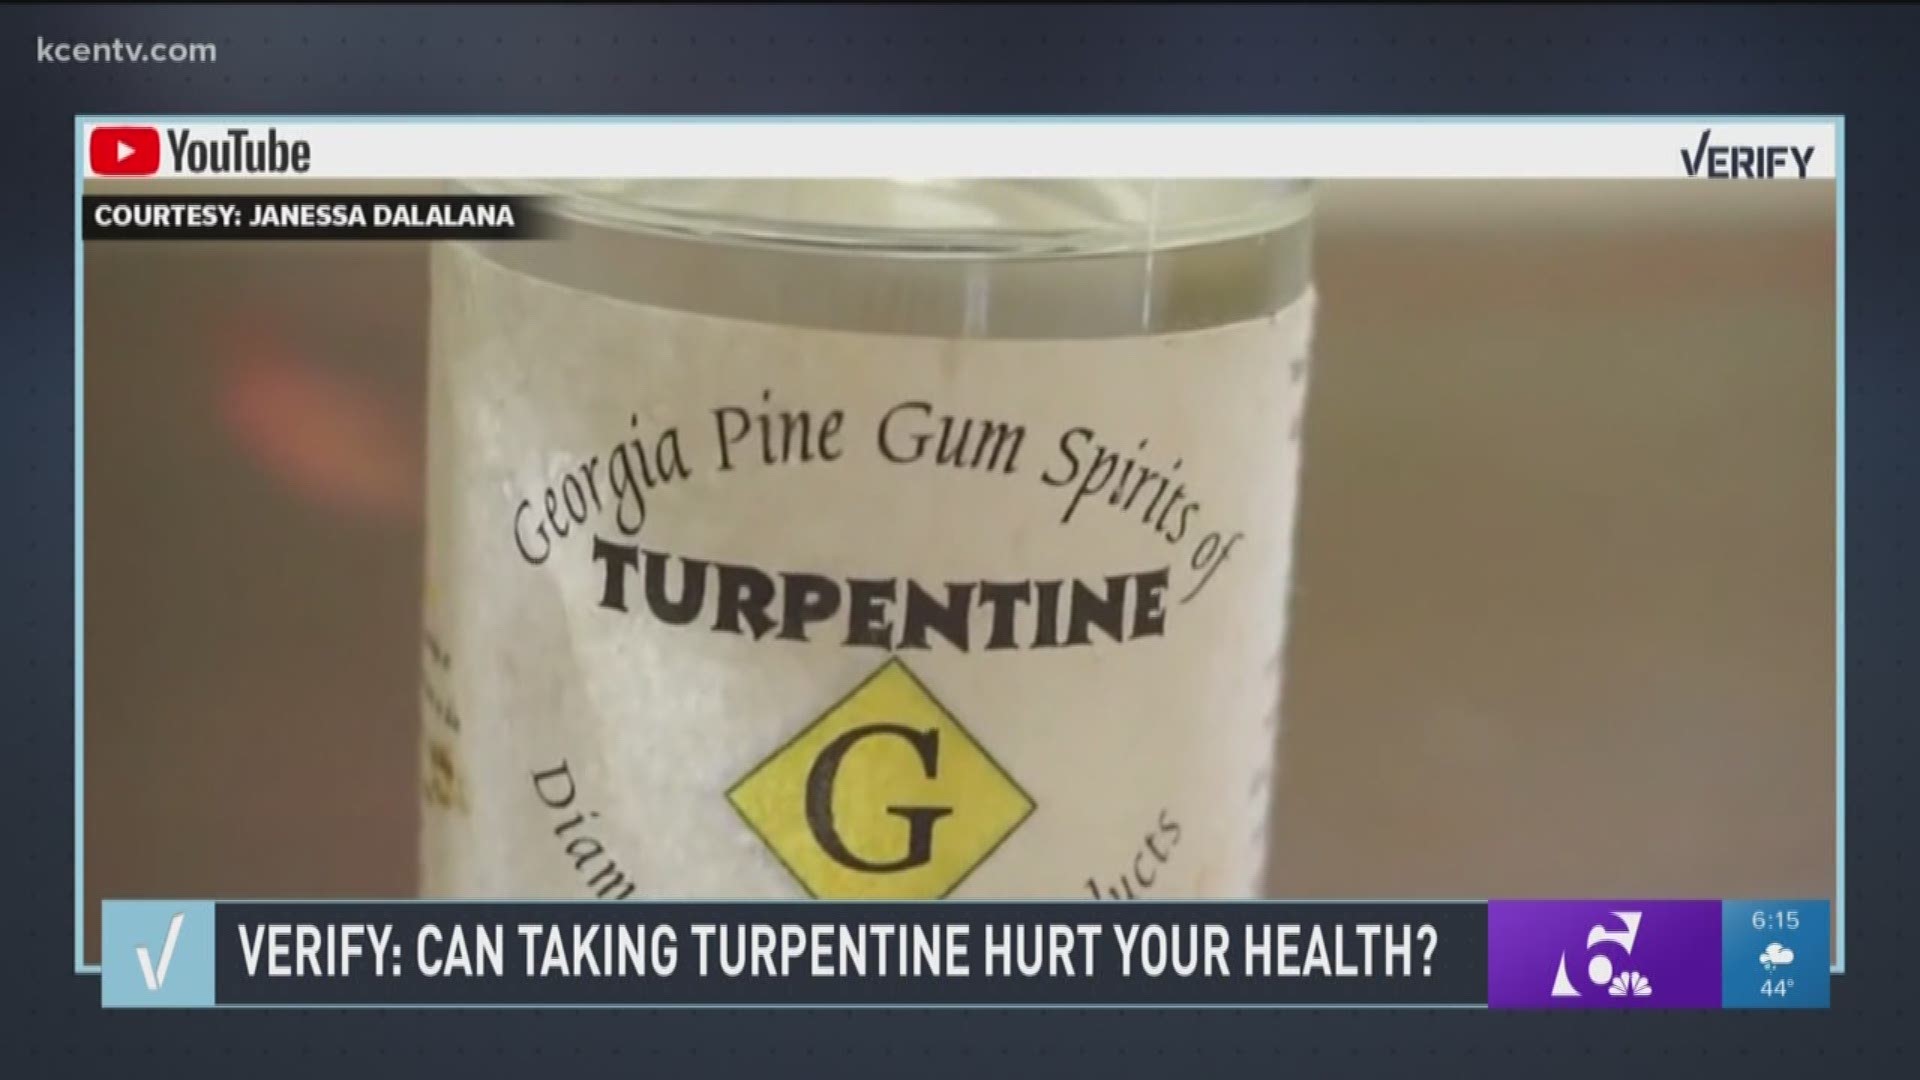 Does taking turpentine hurt your health? We dig in this week's Verify.